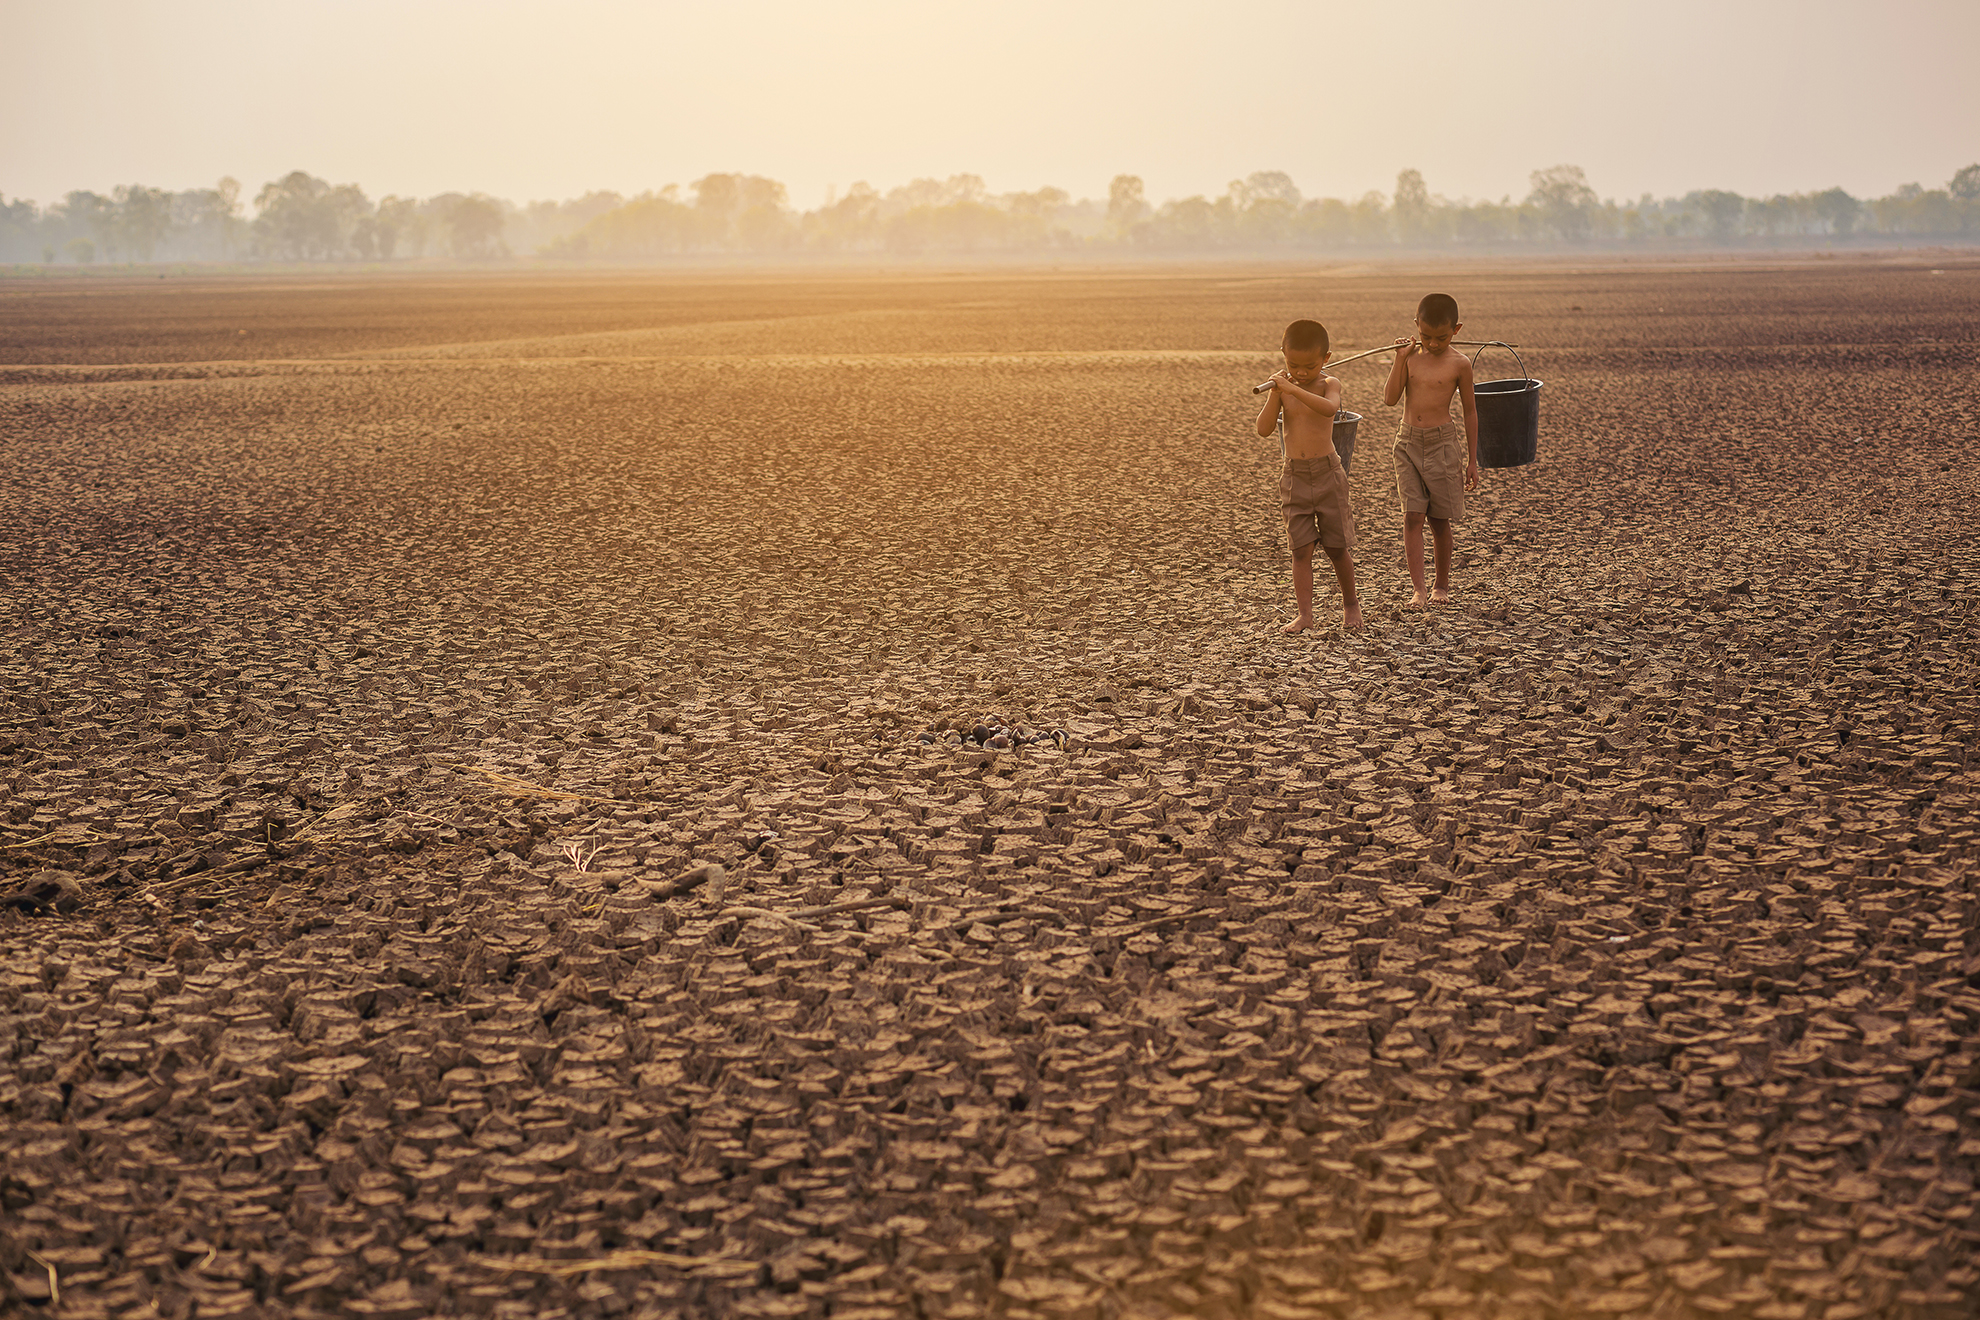 Two boys cross a parched landscape with buckets of water